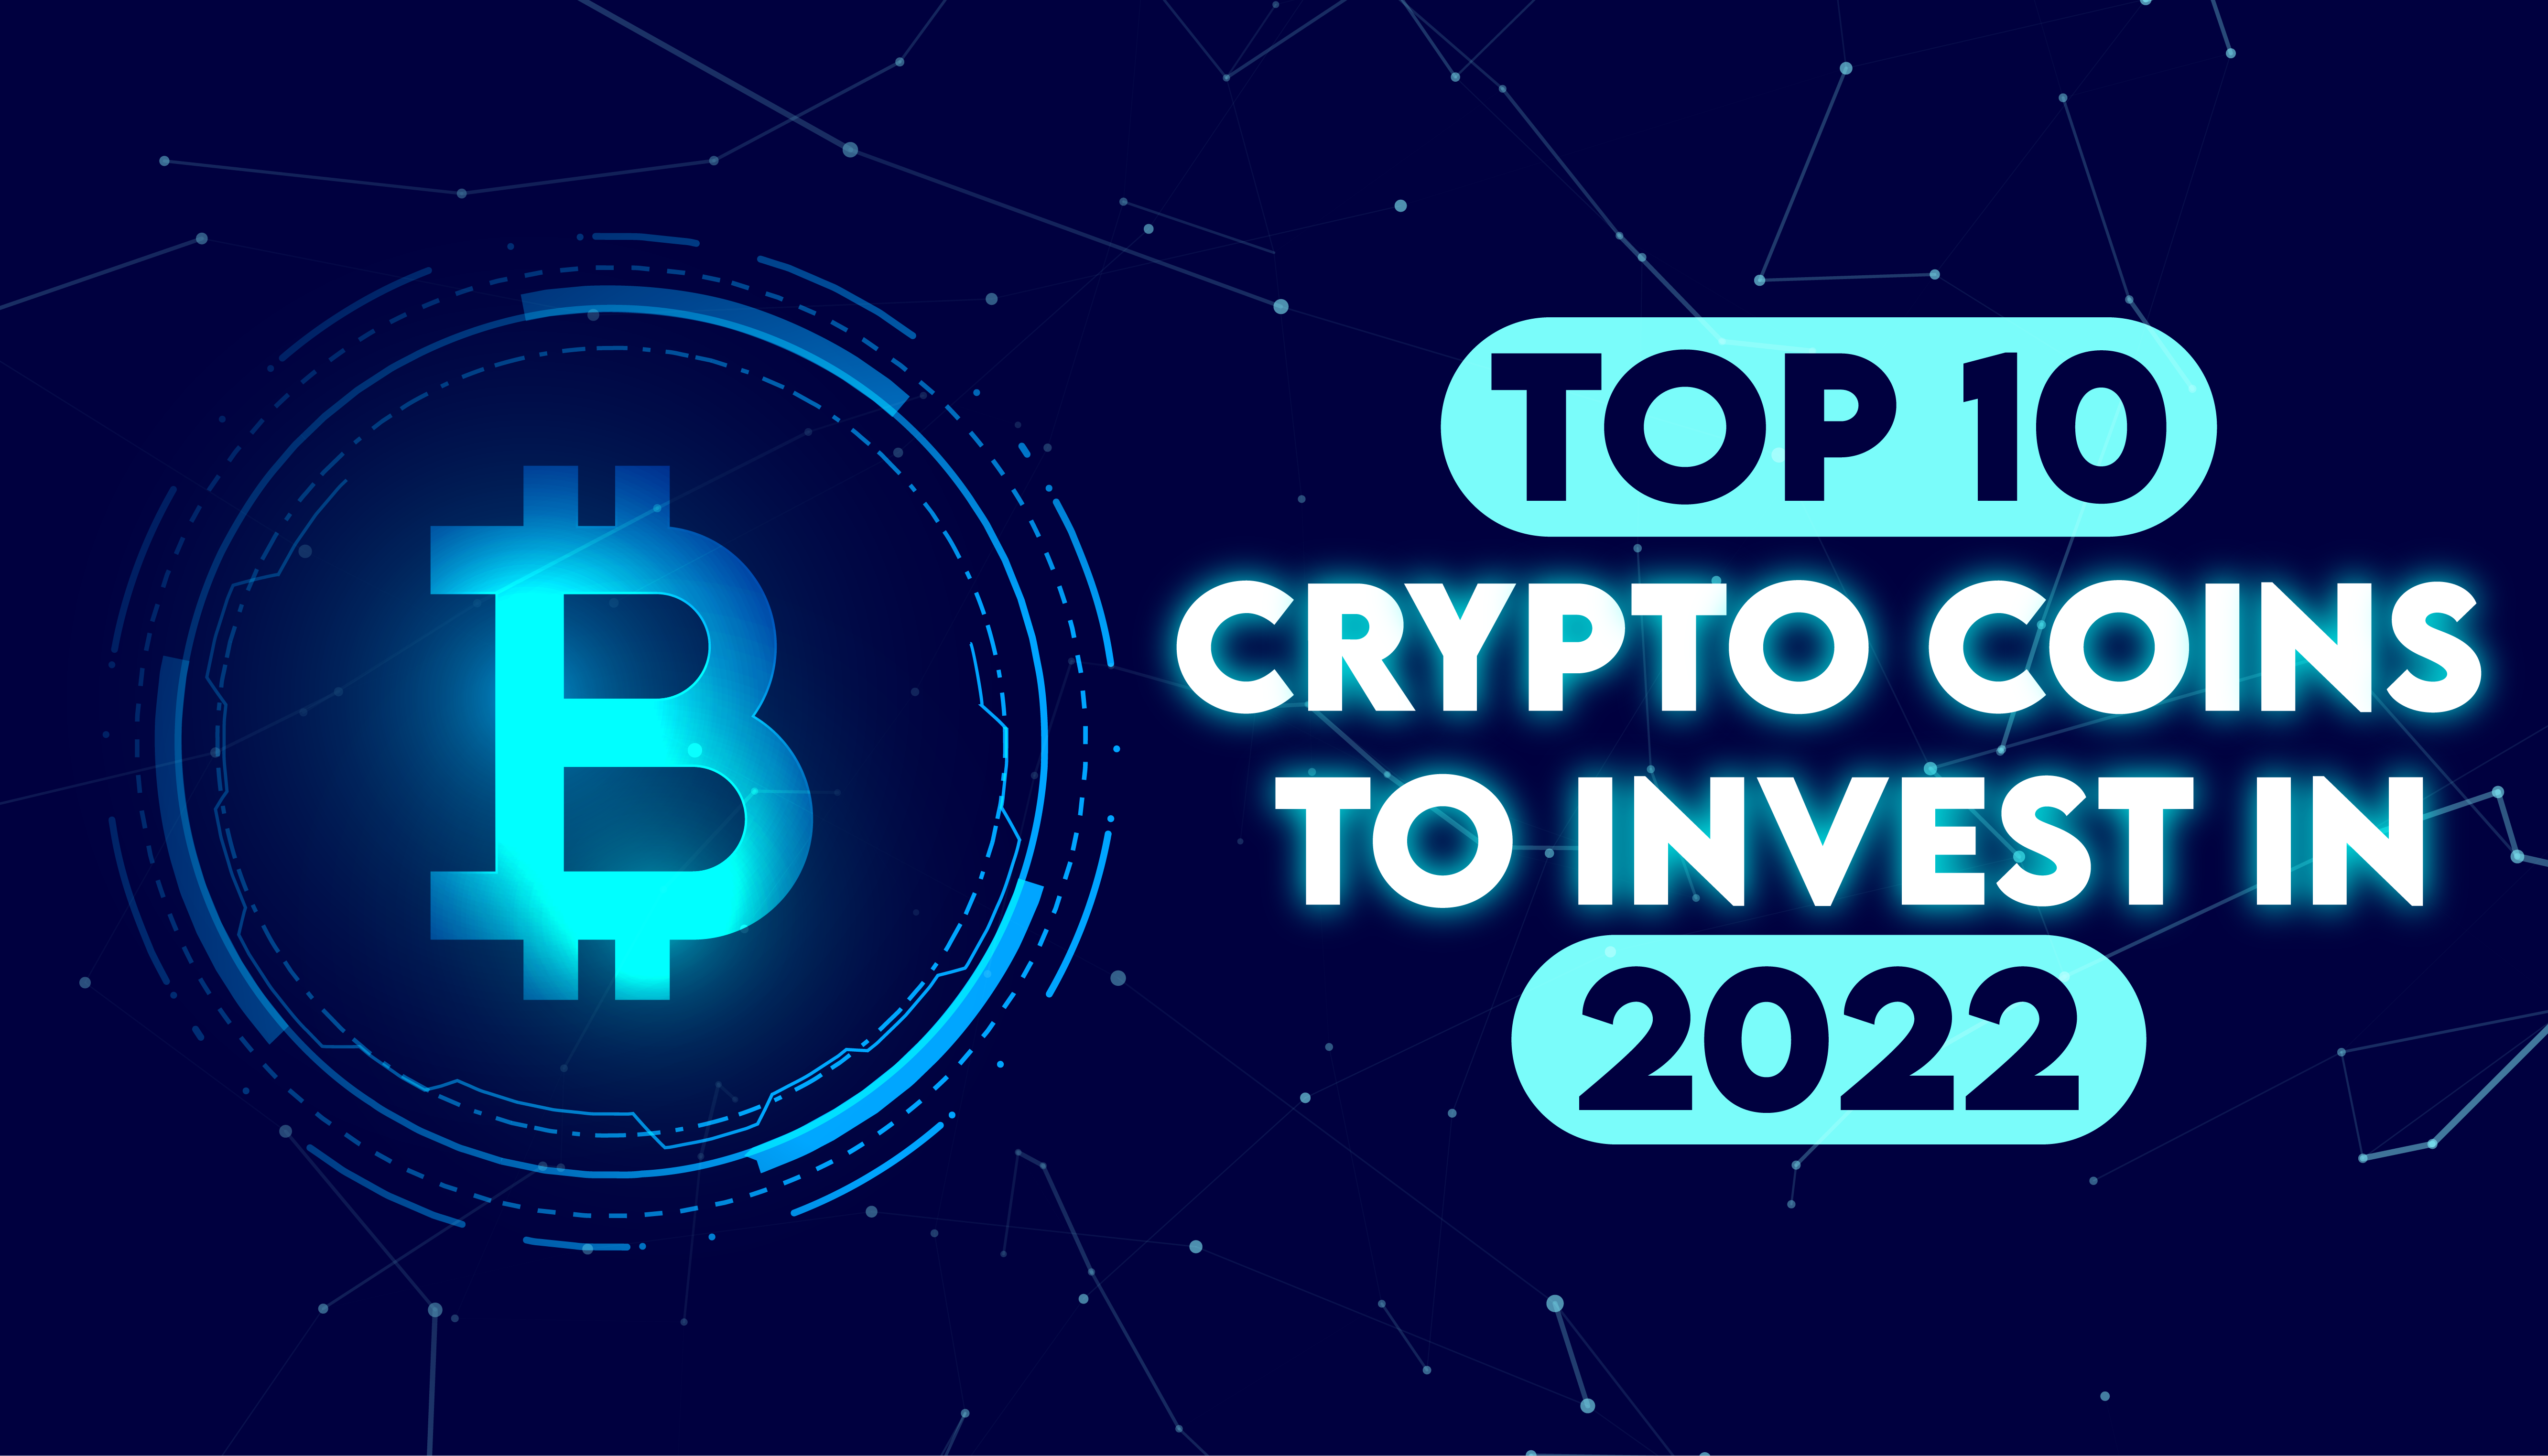 Top 10 crypto coins to invest in 2022